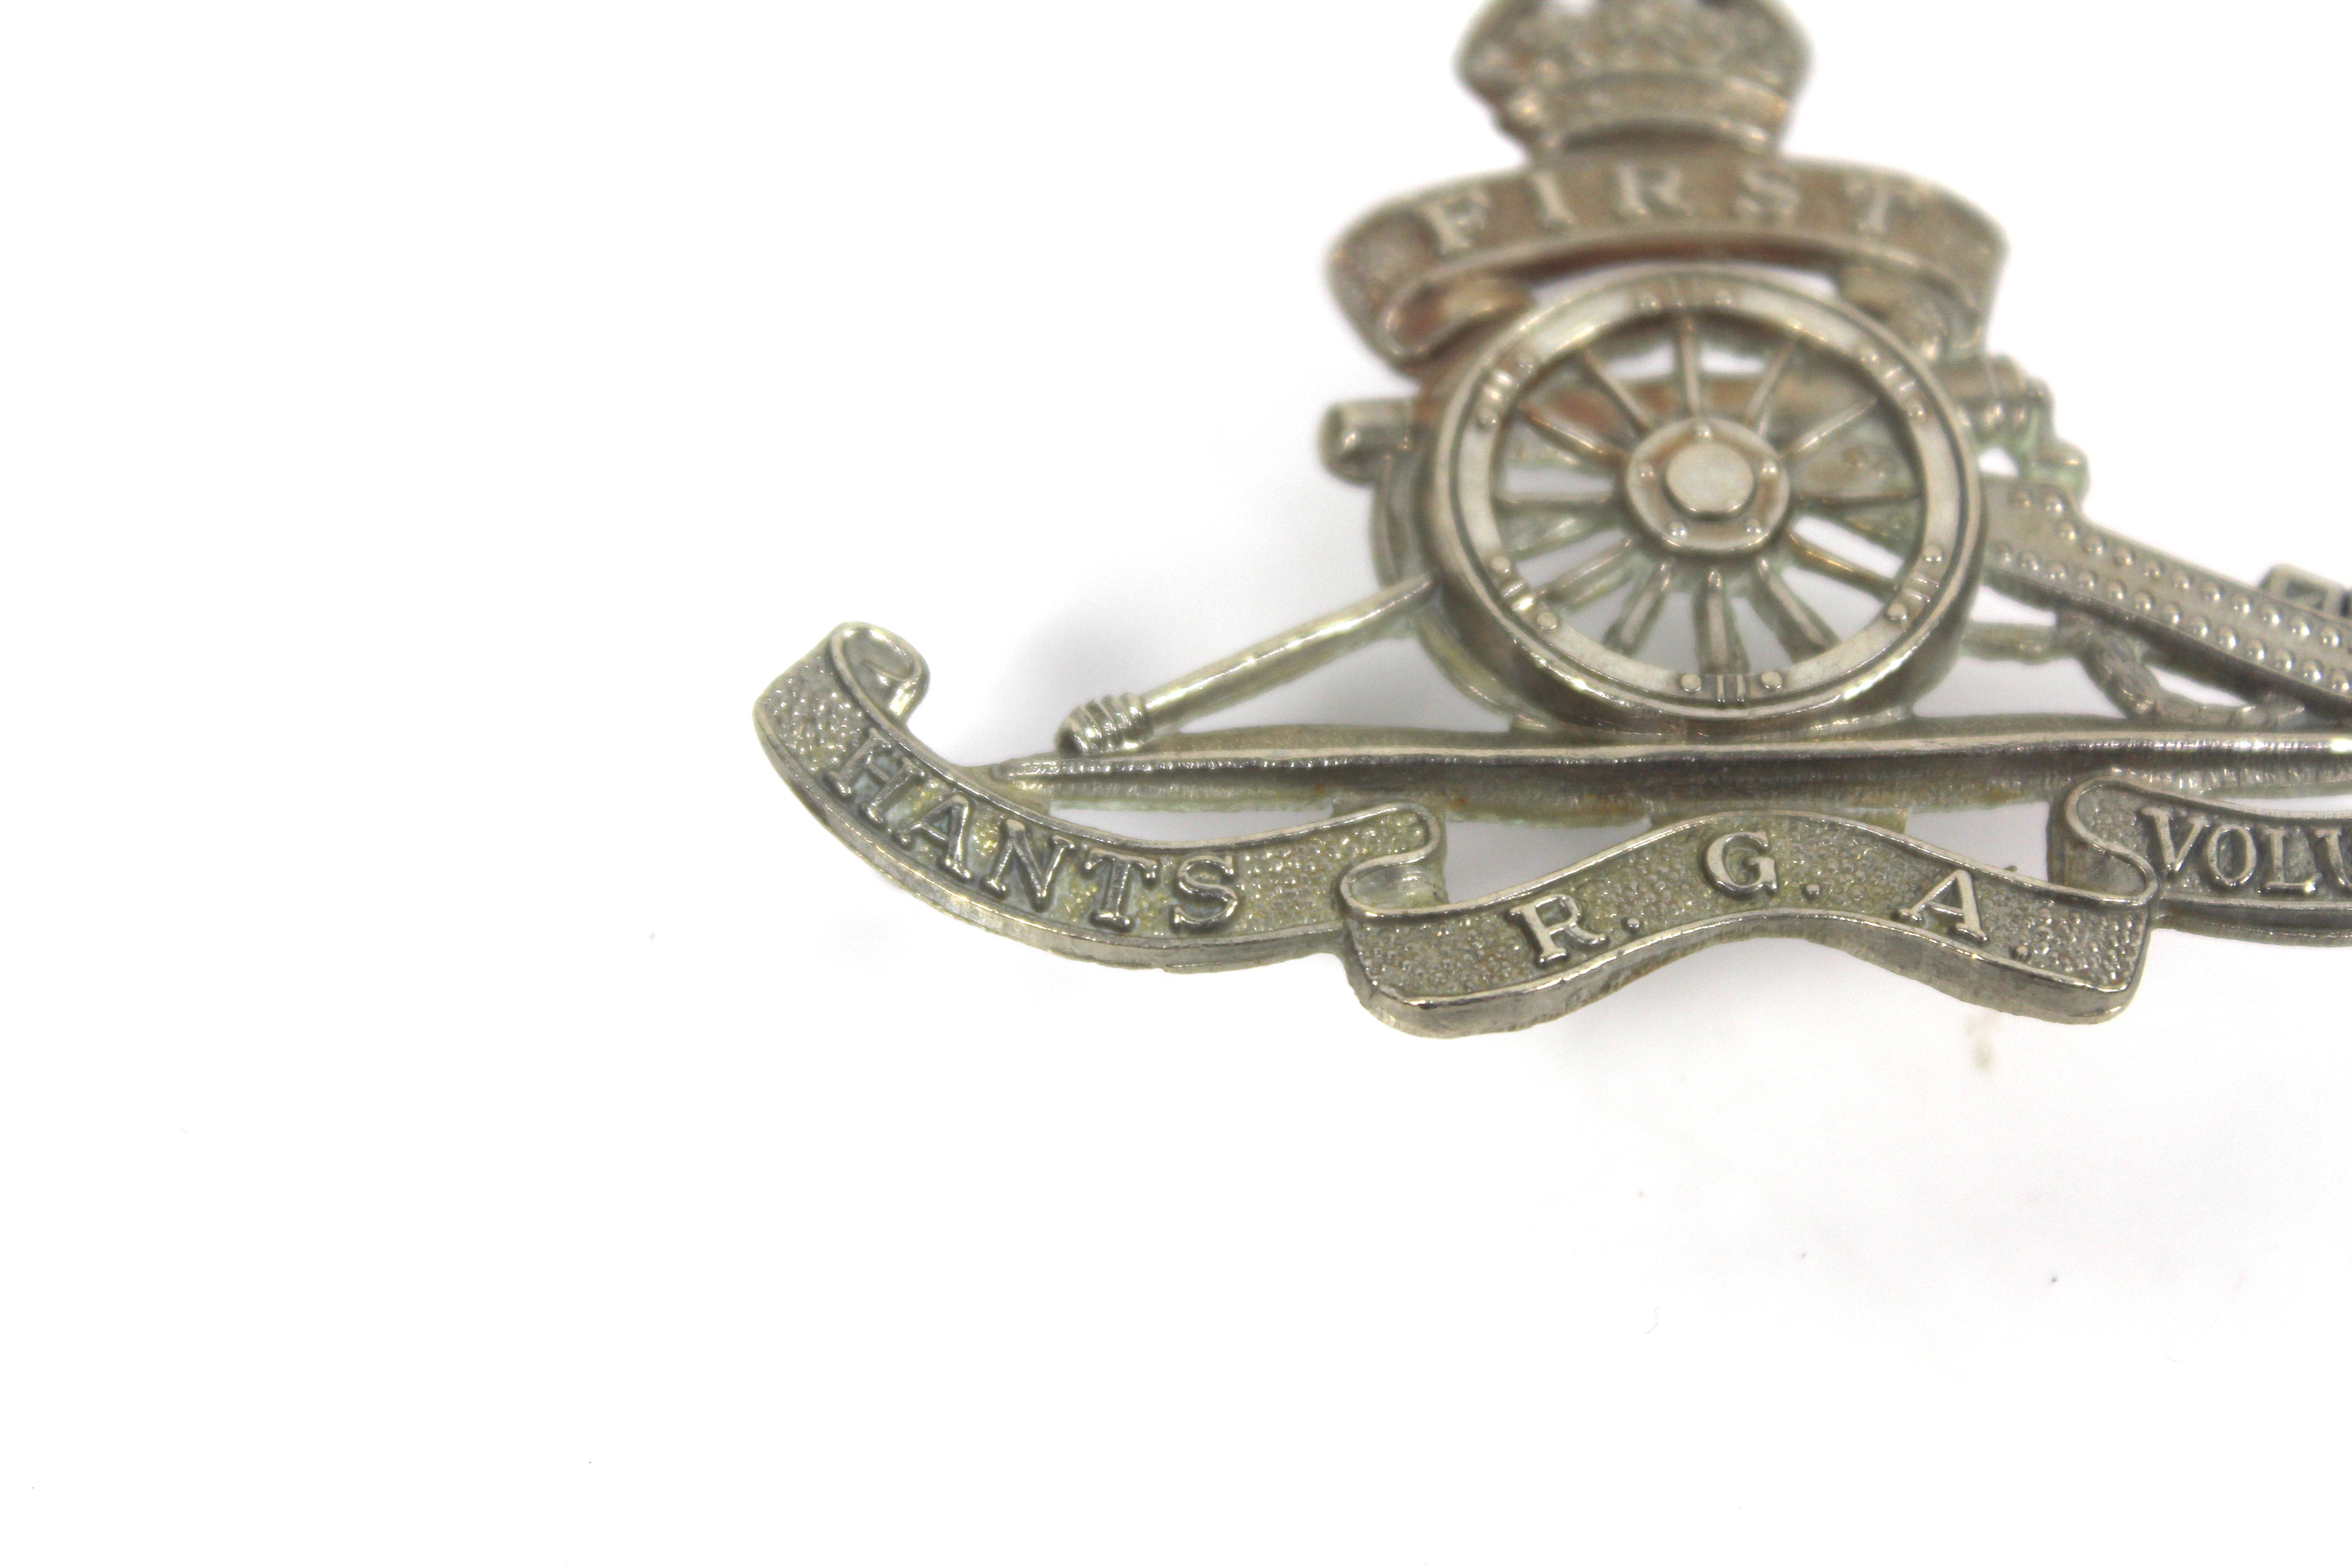 Cap badge to First Hants R.G.A. Volunteers - Image 2 of 4